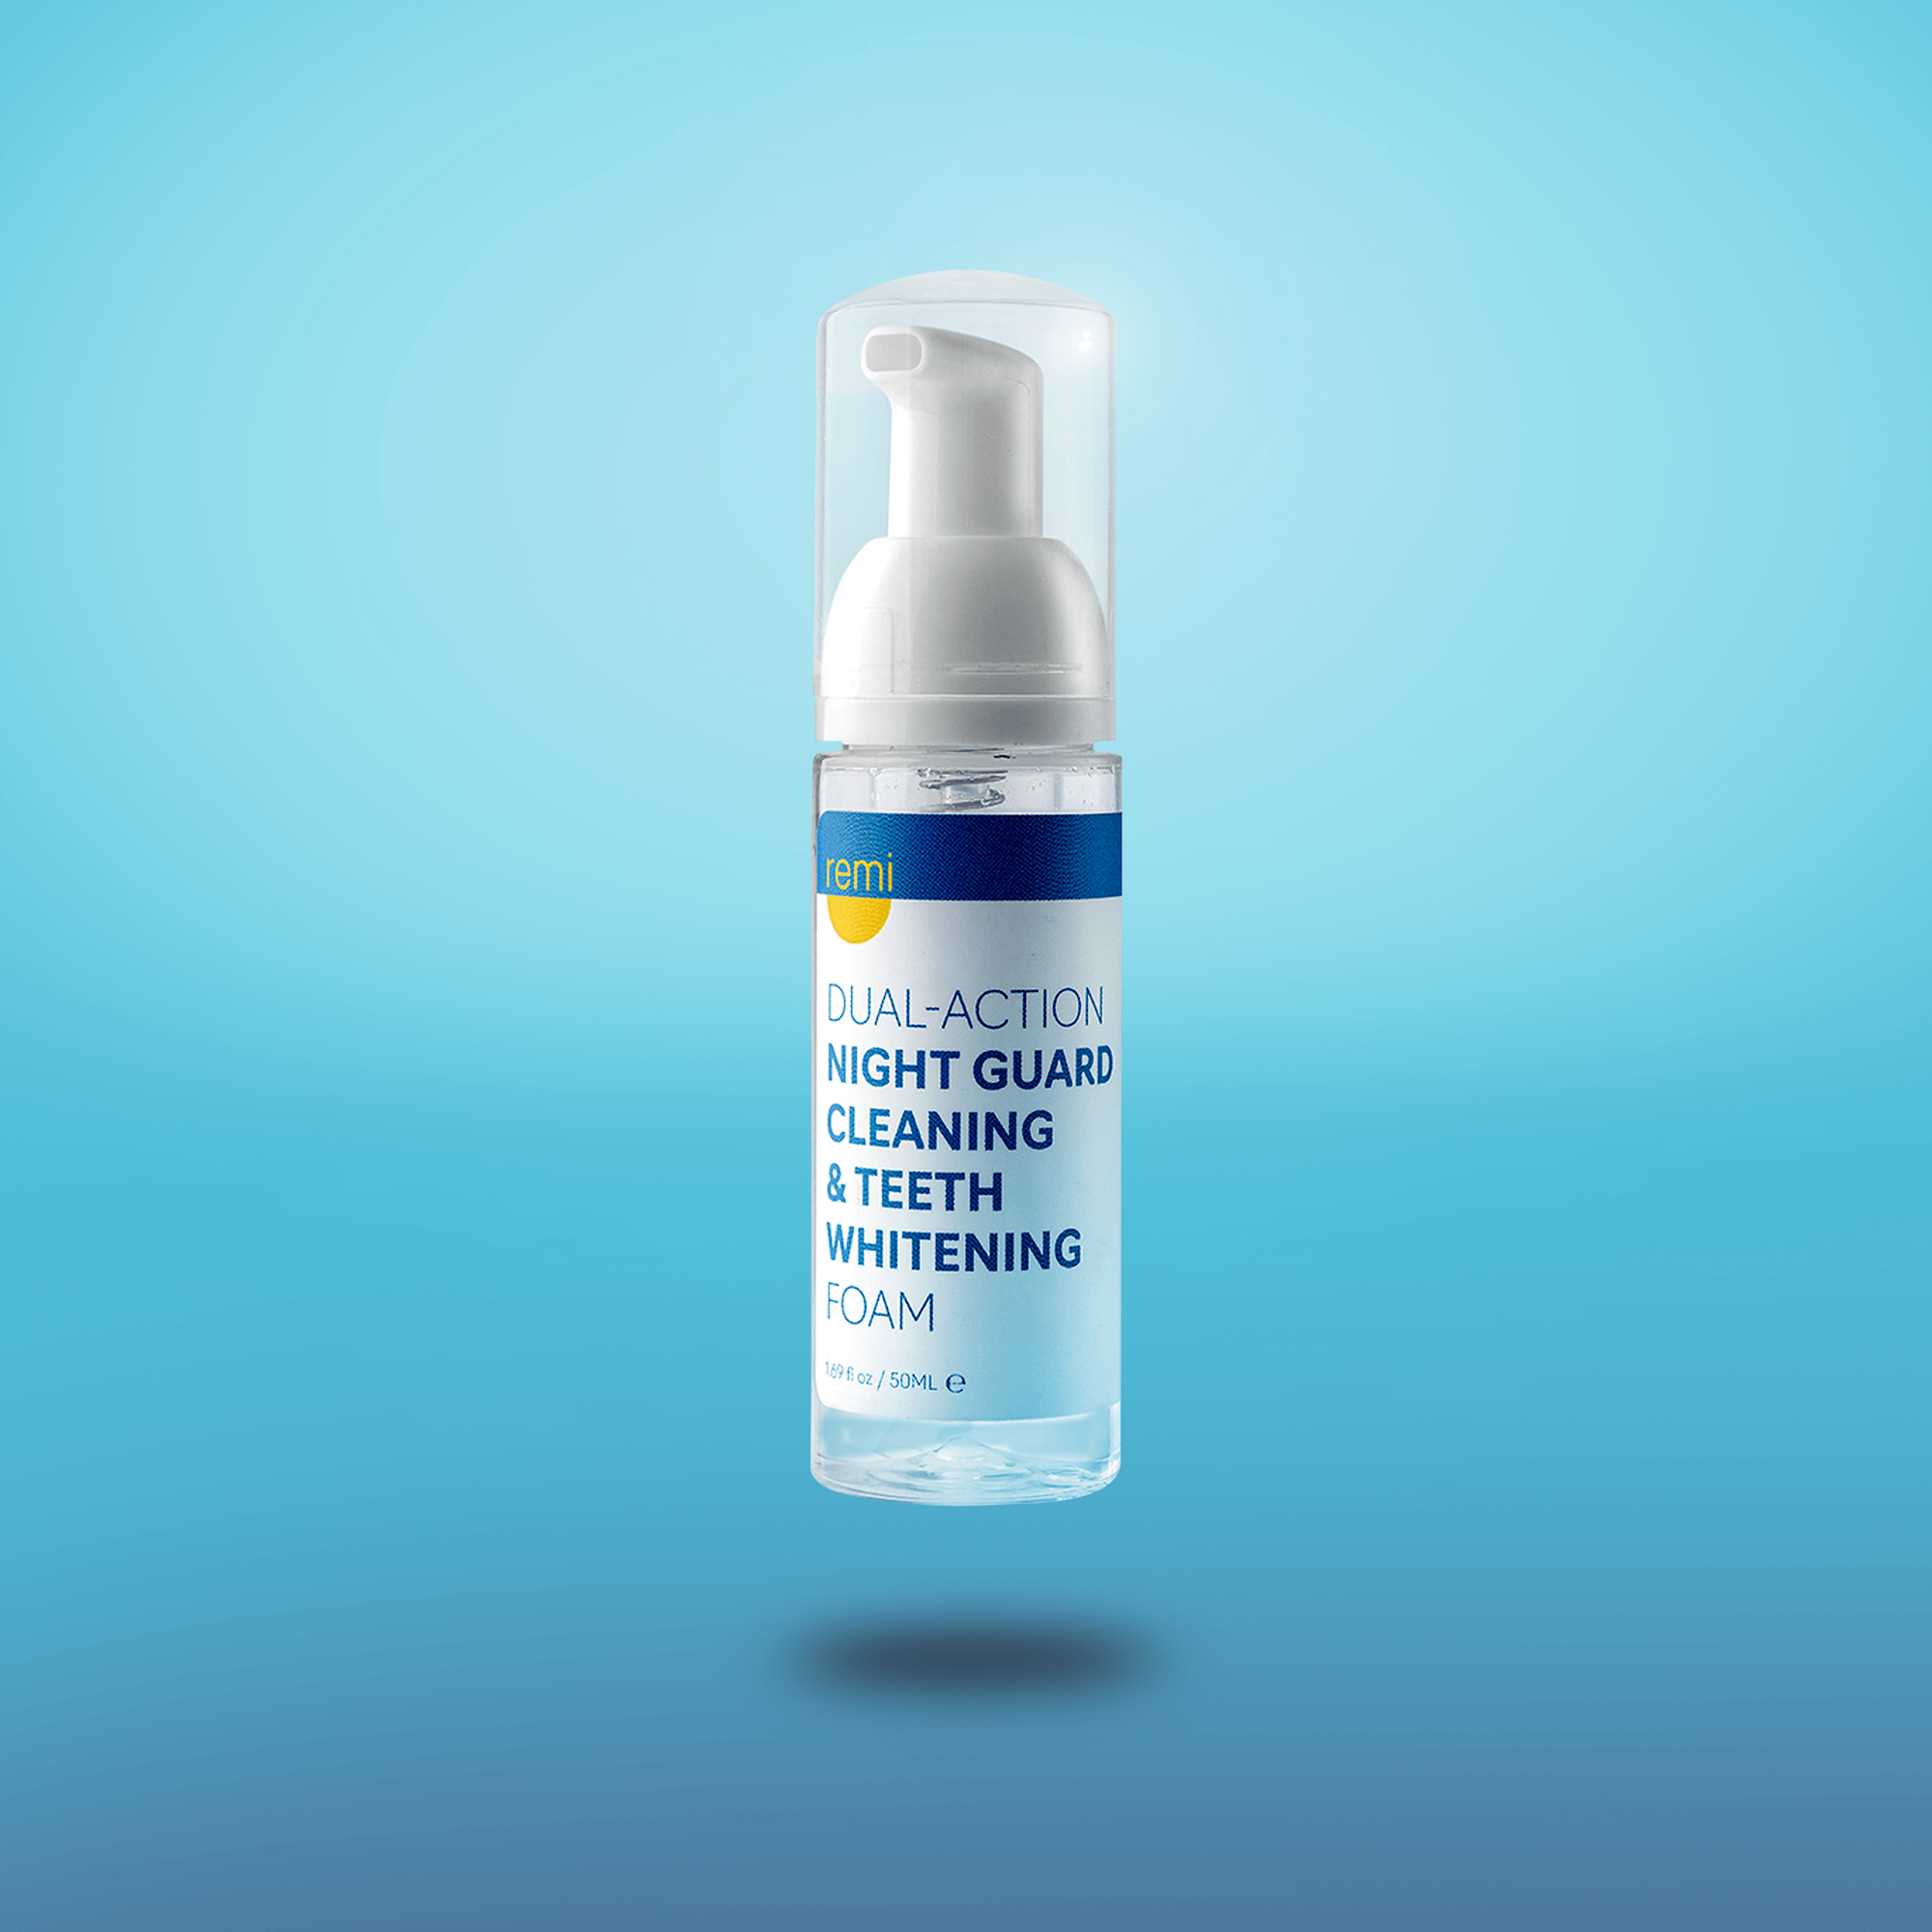 A bottle of Night Guard Cleaning + Teeth Whitening Foam on a blue background.